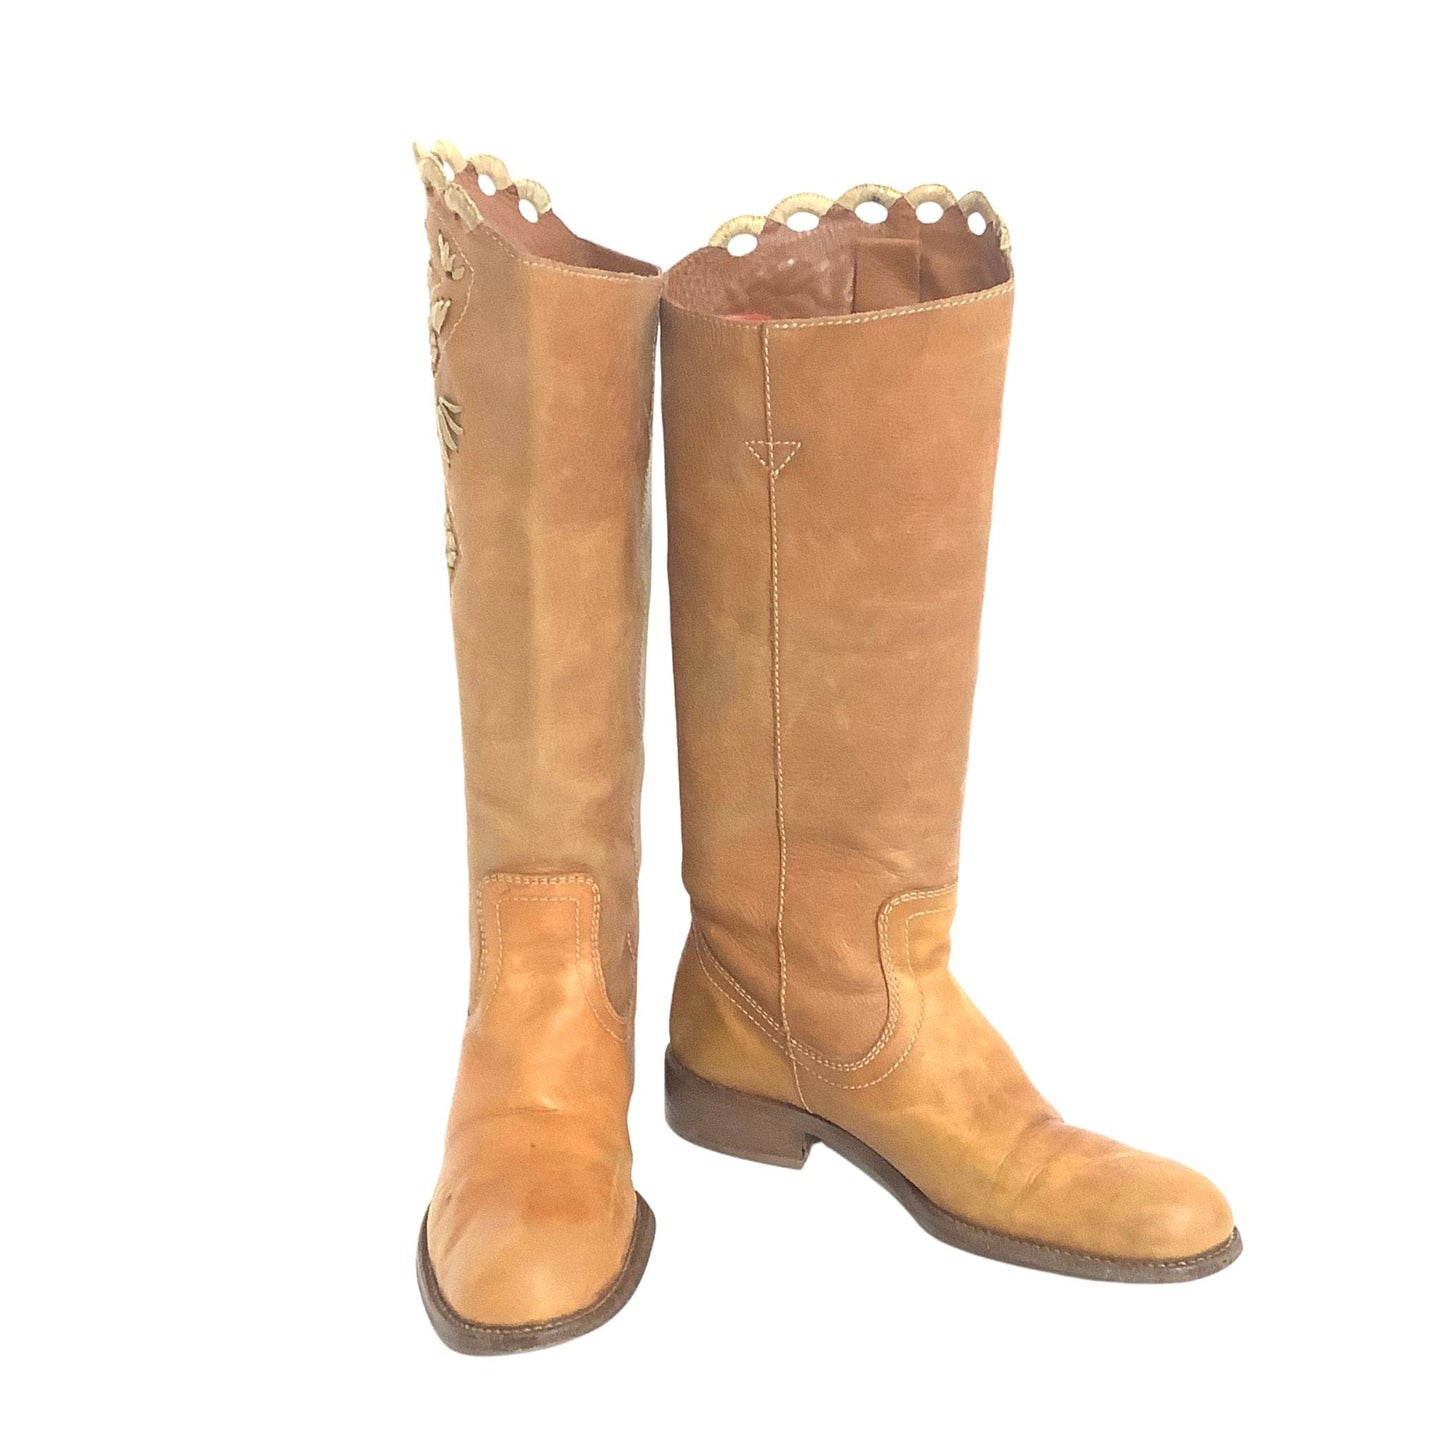 BCBG Embroidered Boots 7.5 / Tan / Y2K - Now